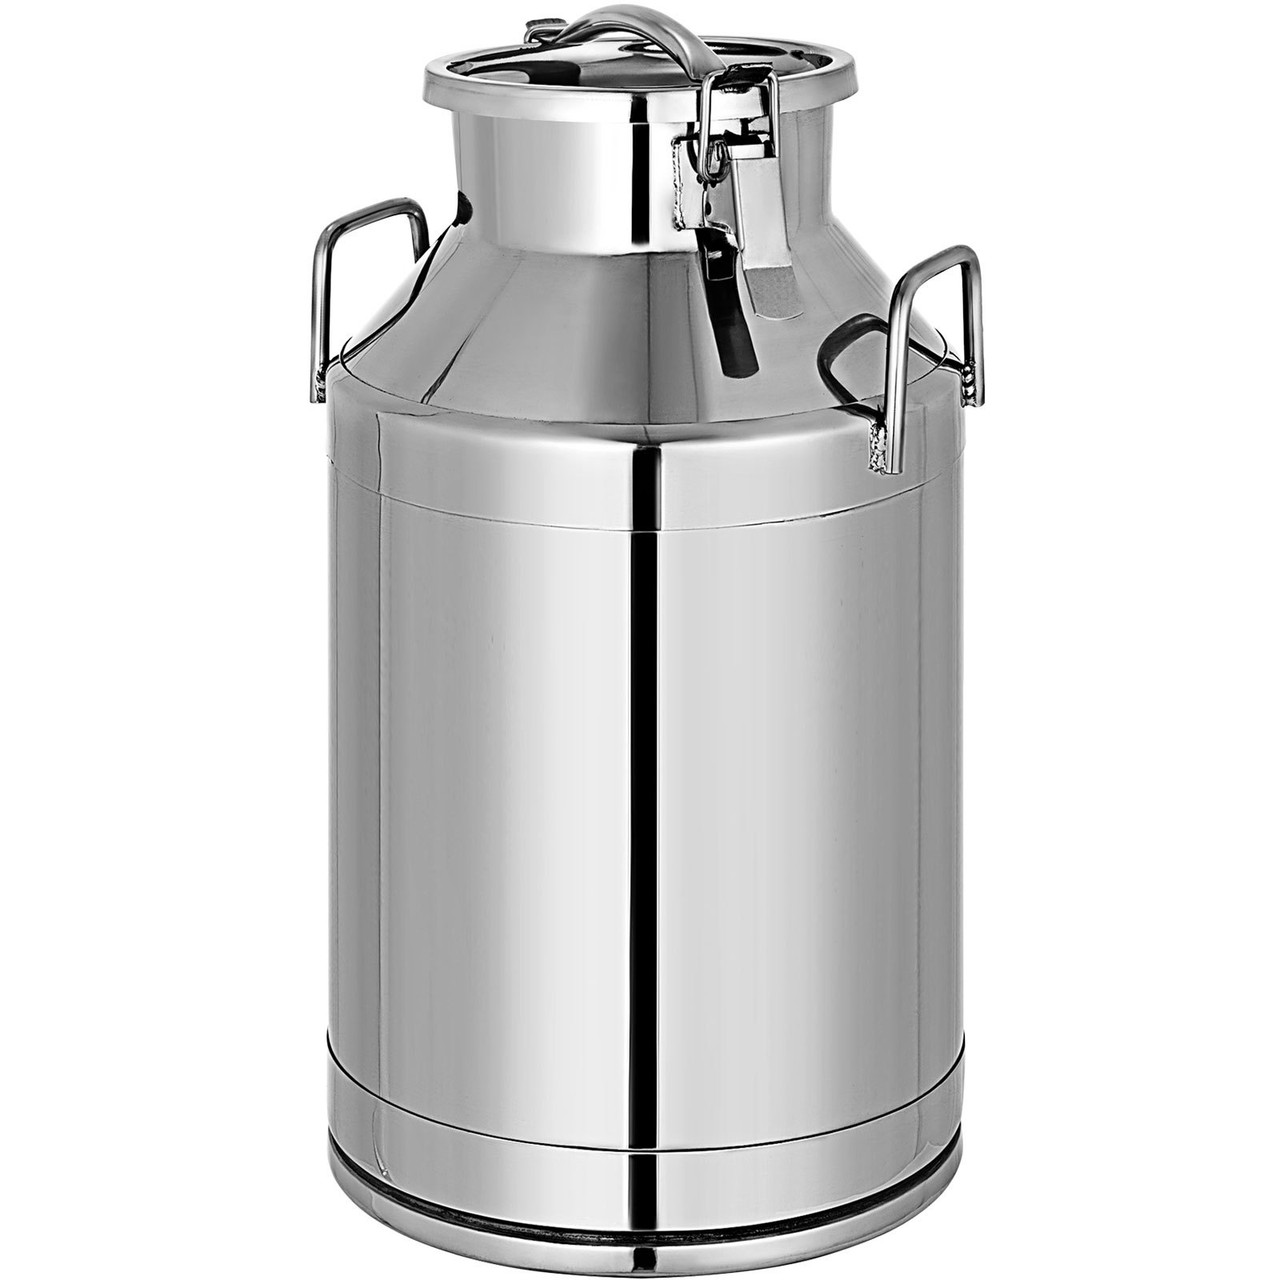 304 Stainless Steel Milk Can 50 Liter Milk Bucket Wine Pail Bucket 13.25 Gallon Milk Can Tote Jug with Sealed Lid Heavy Duty